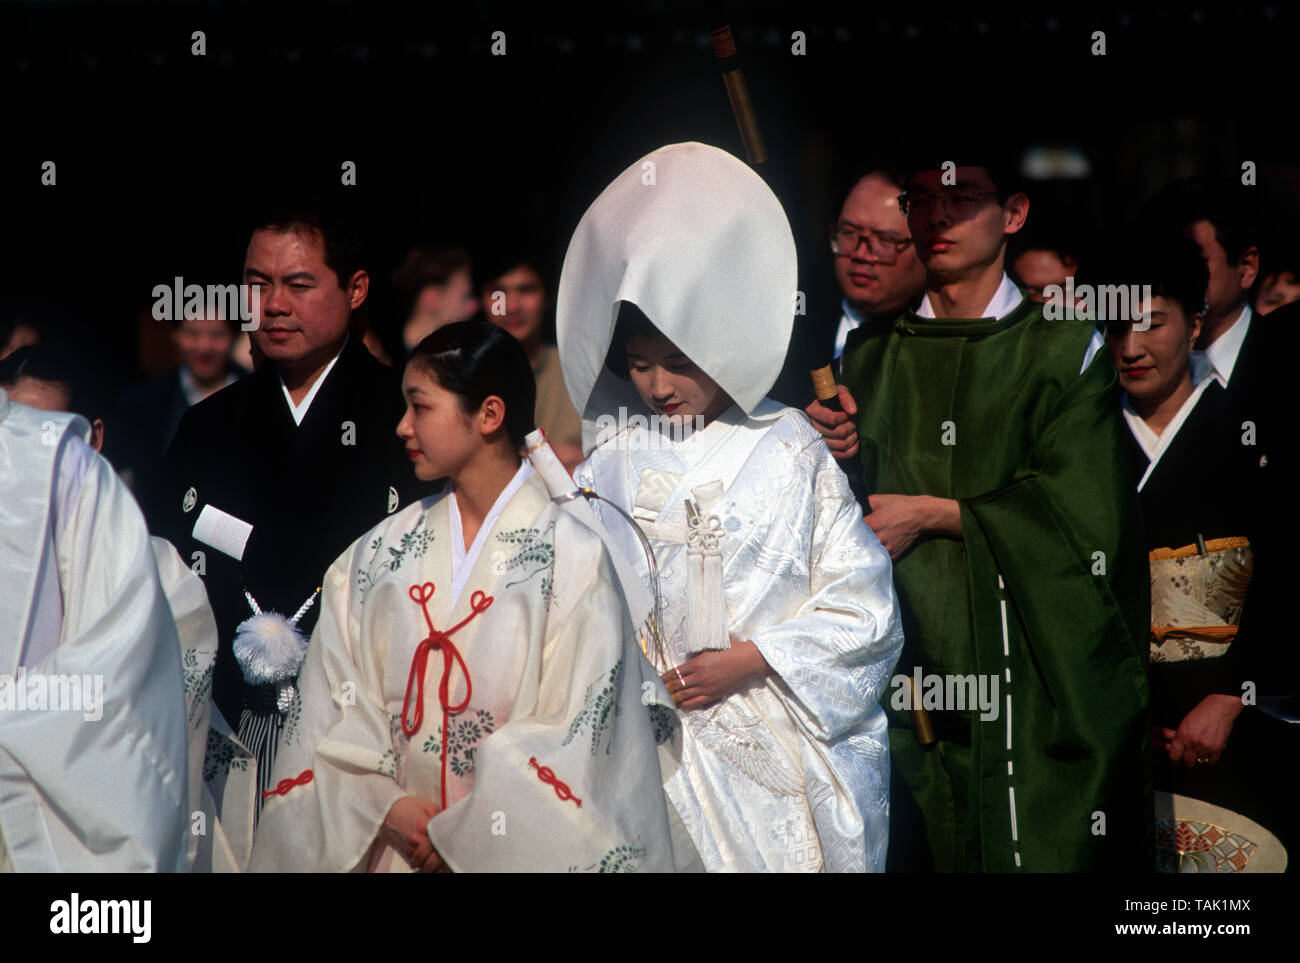 At A Traditional Japanese Wedding The Bride And Groom Usually Wear Japanese Wedding Kimono The Bride Wears A White Wedding Kimono Called Uchikake Stock Photo Alamy